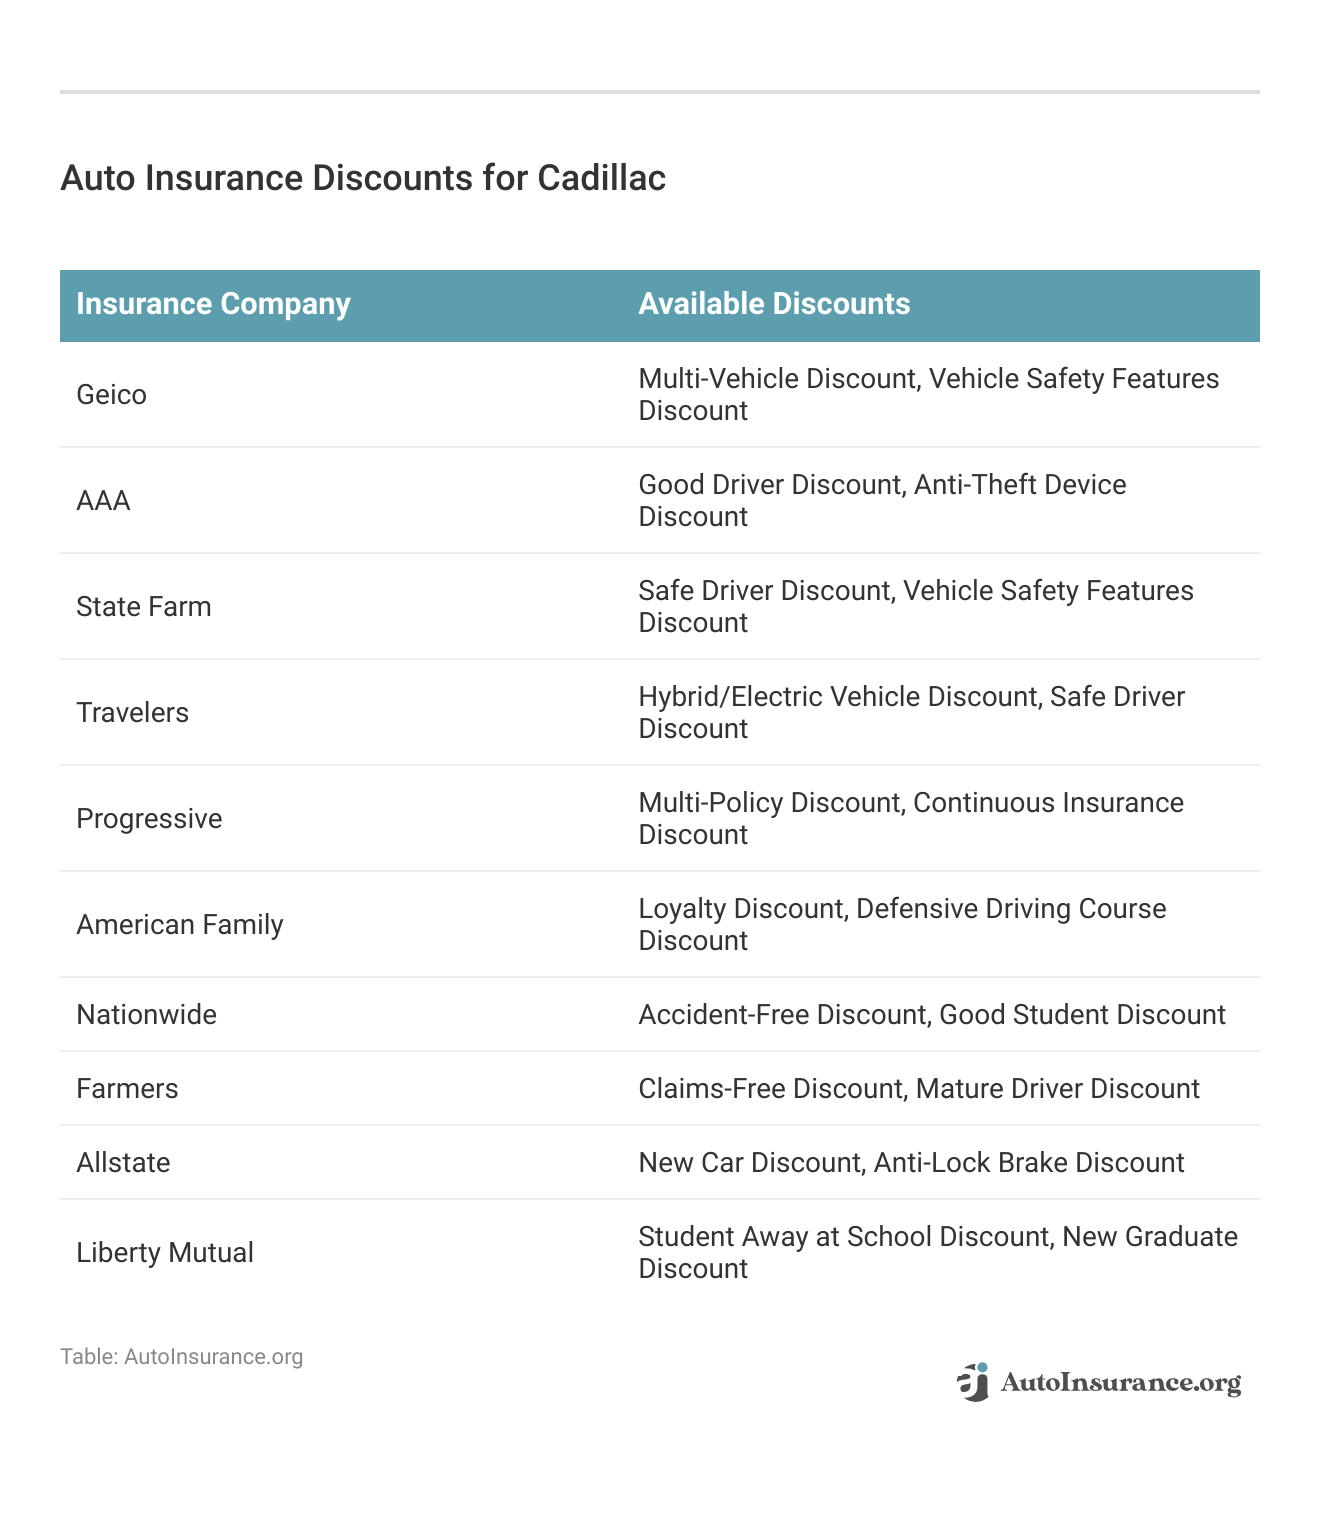 <h3>Auto Insurance Discounts for Cadillac</h3> 